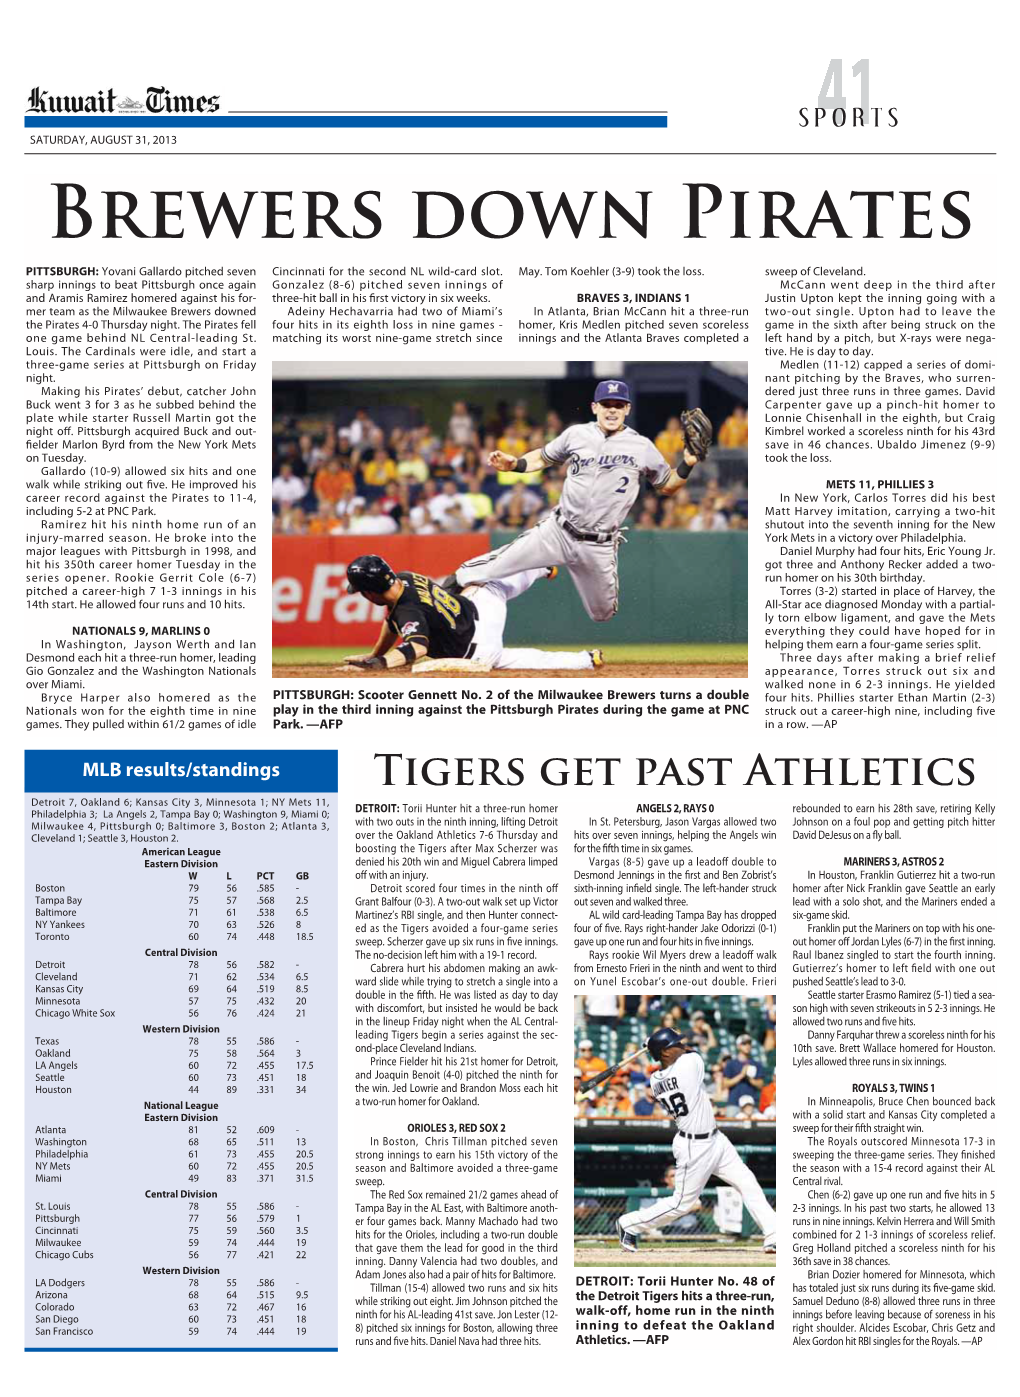 Brewers Down Pirates